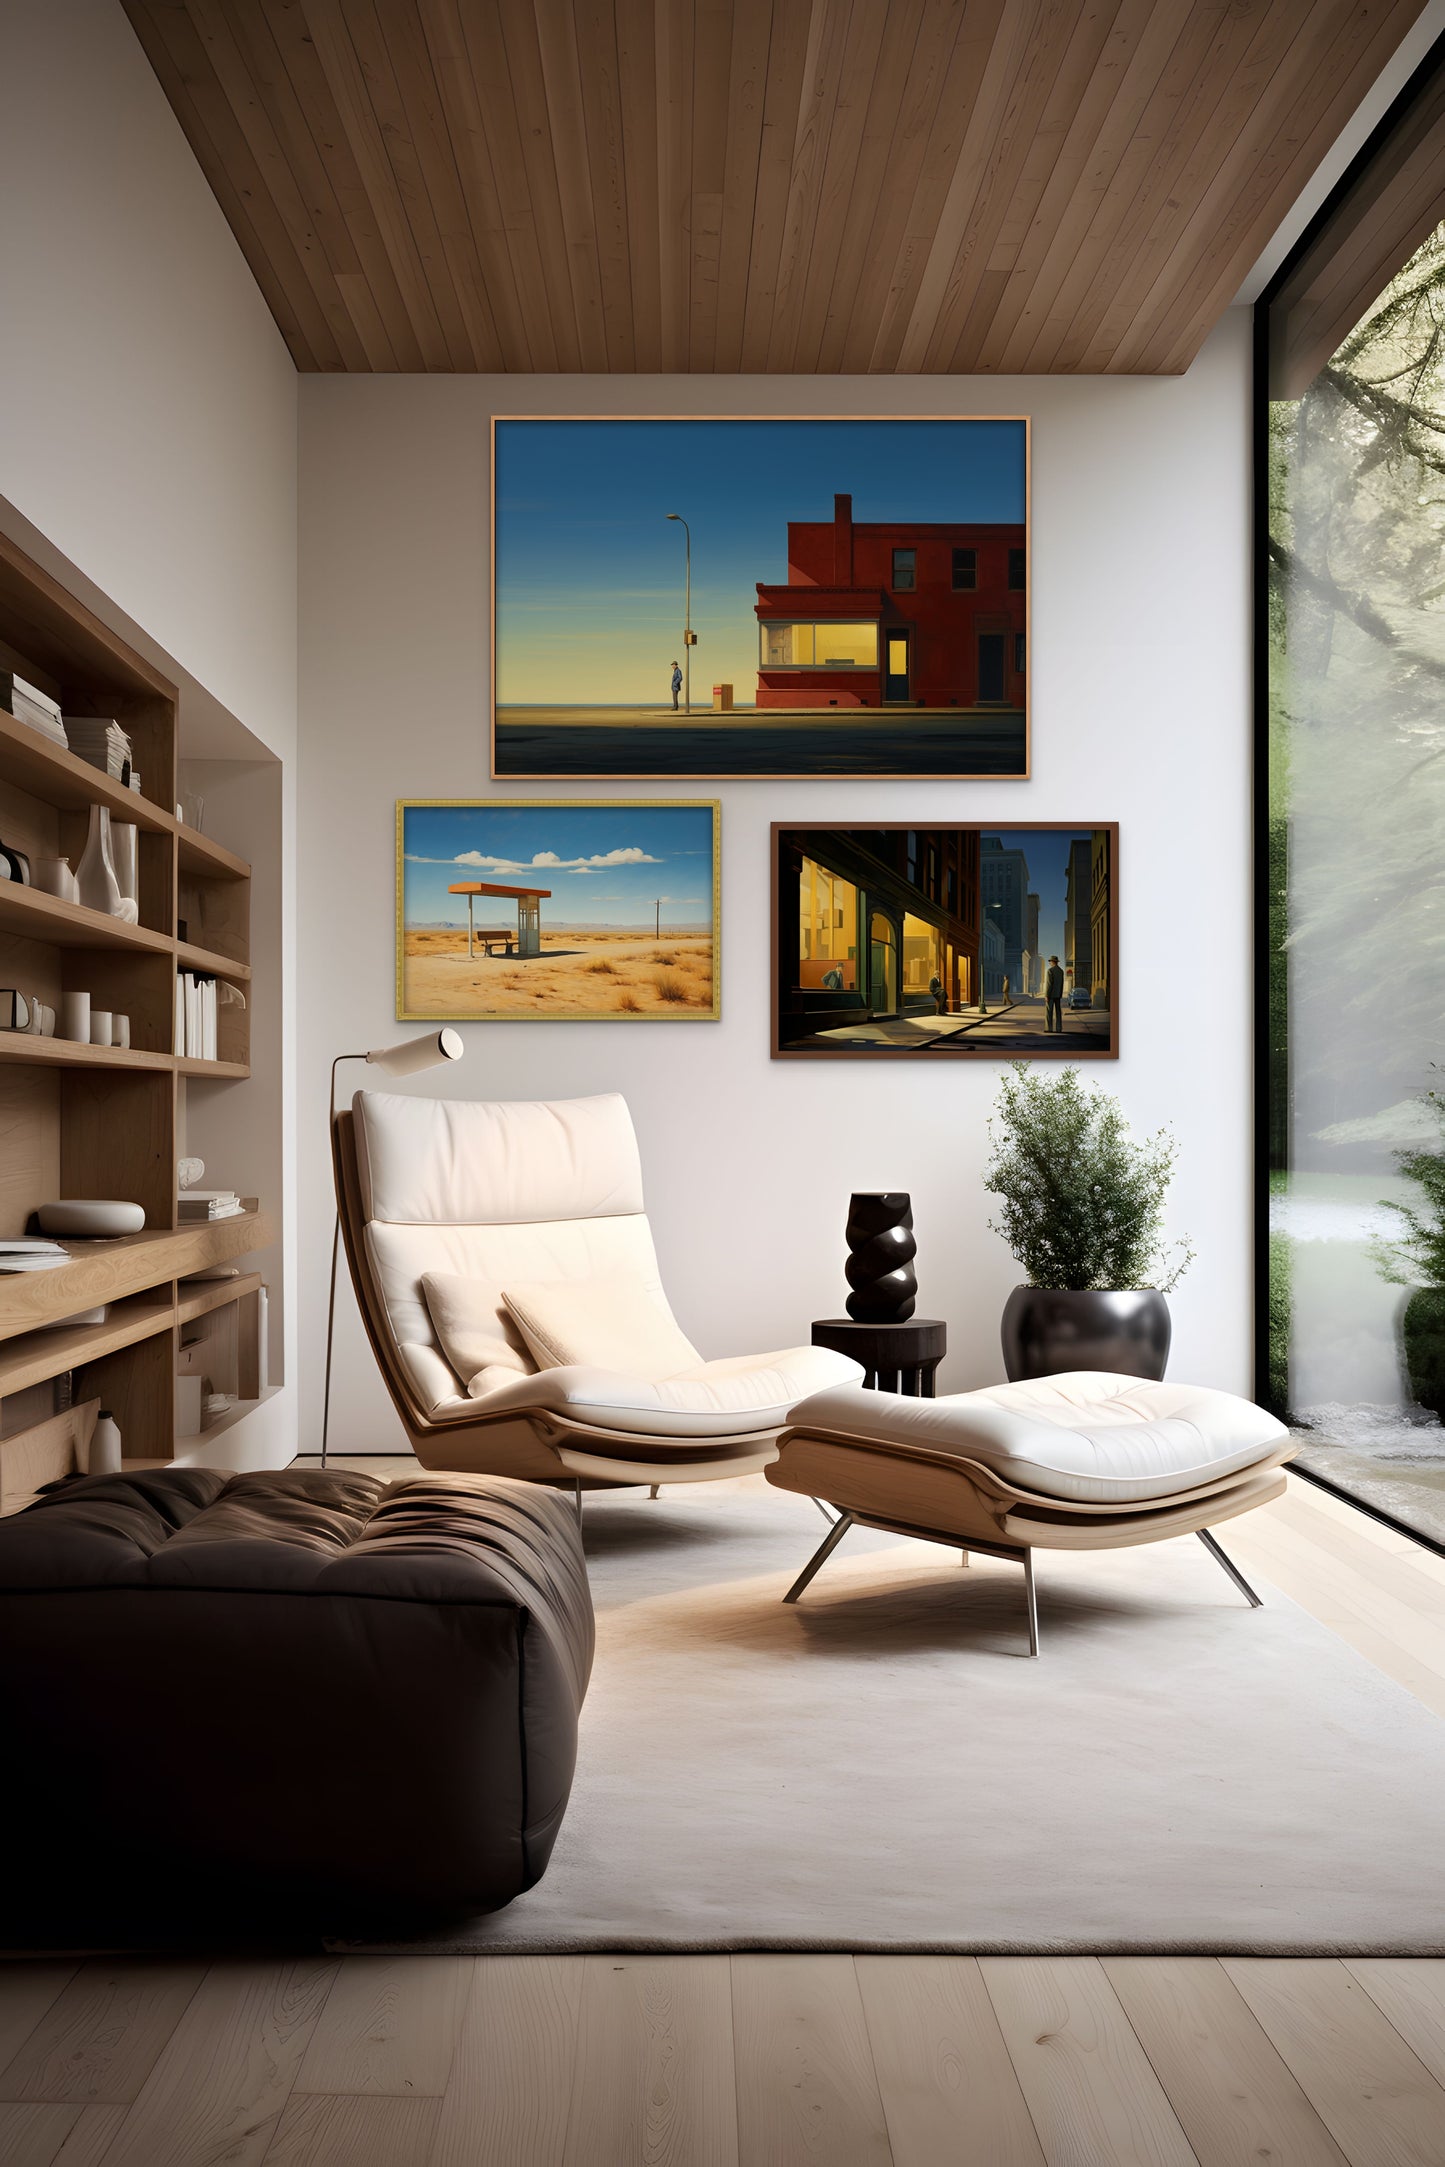 Modern living room interior with armchair, paintings, and large window.